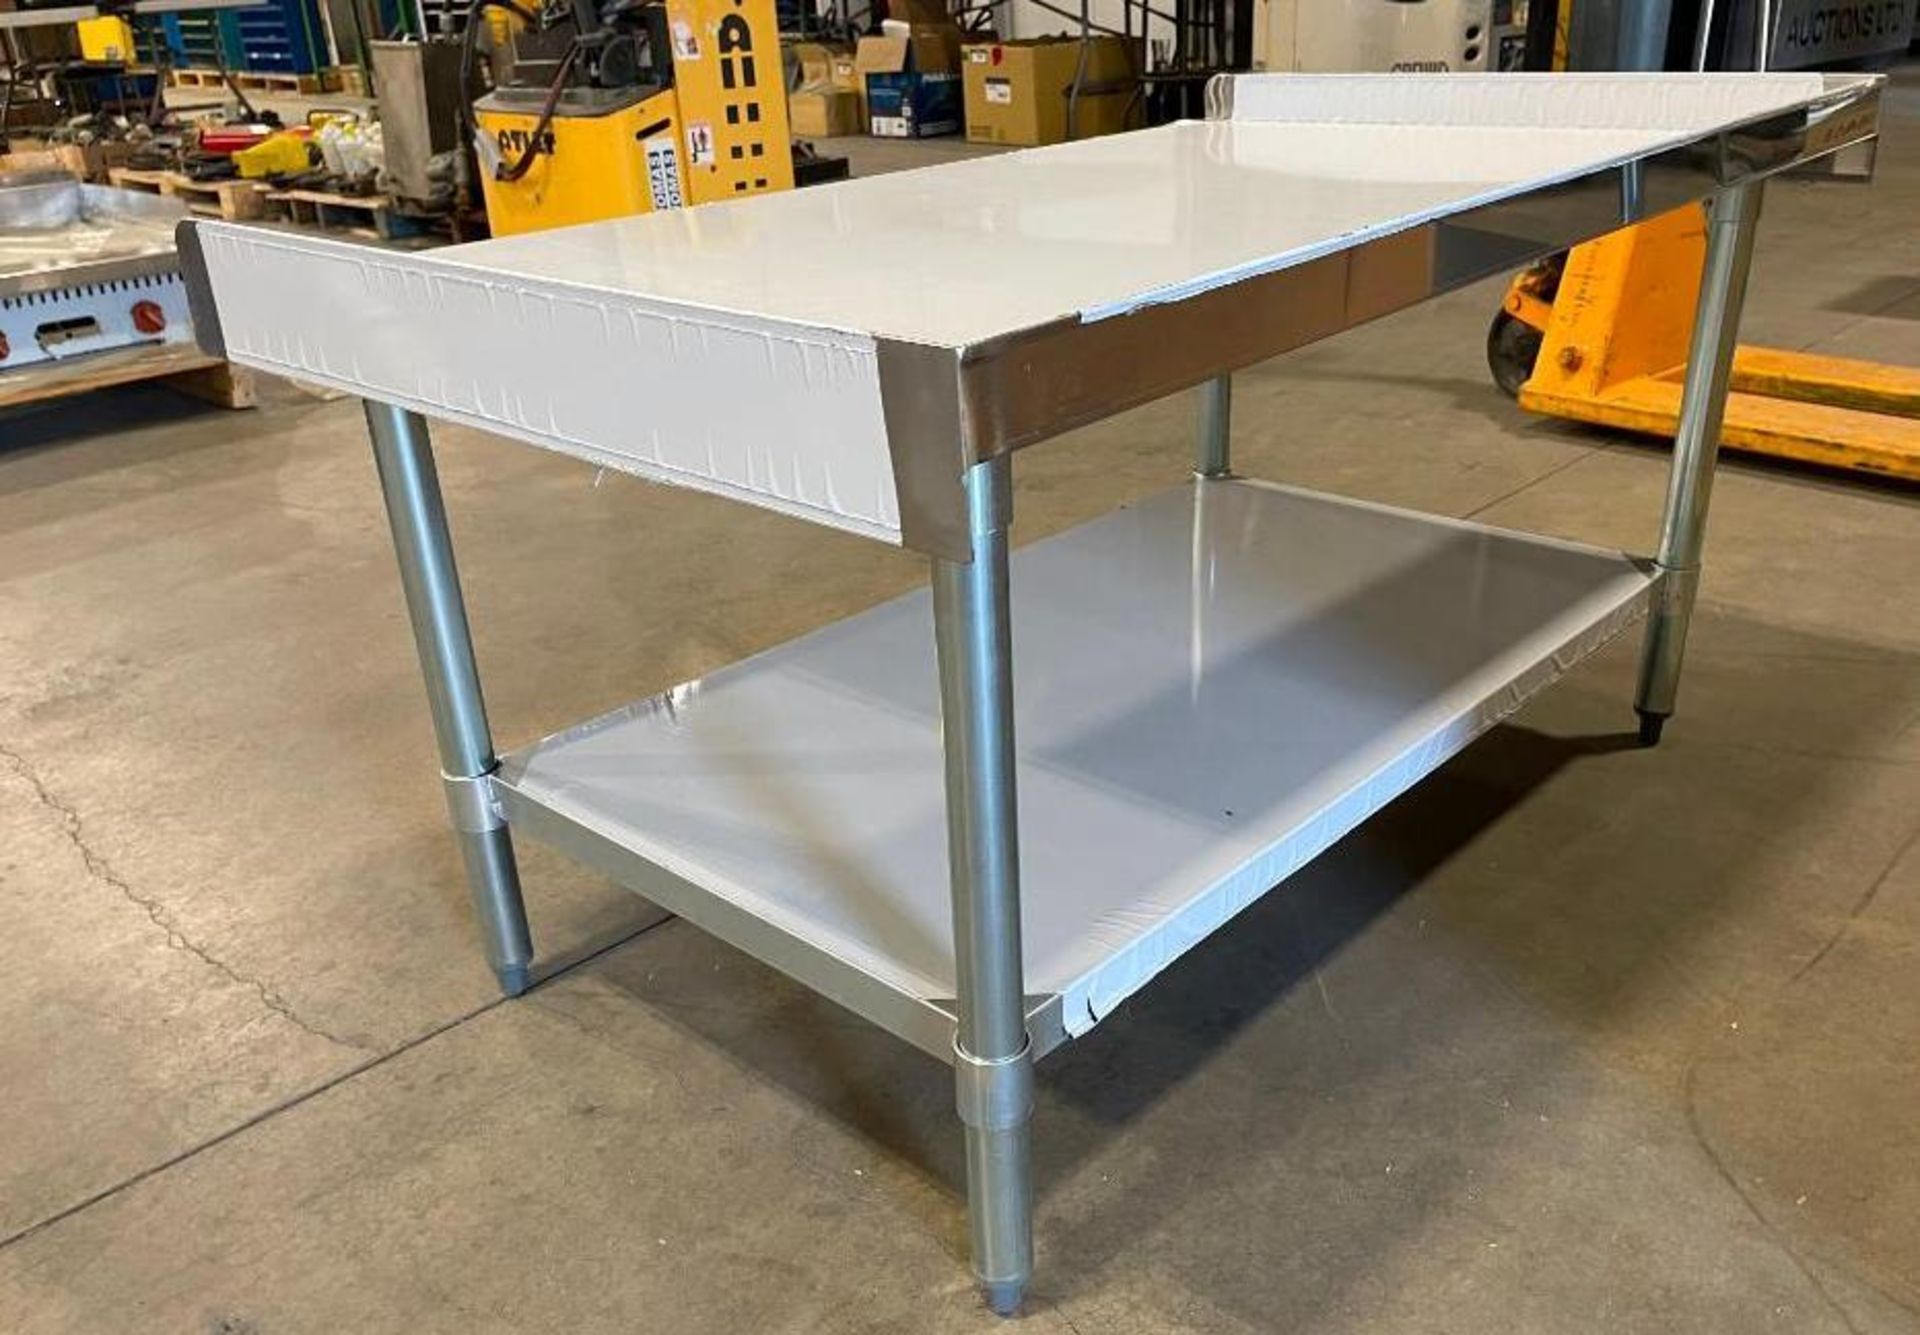 CHEF'S MATE 30" X 48" STAINLESS STEEL EQUIPMENT STAND - NEW - Image 4 of 10